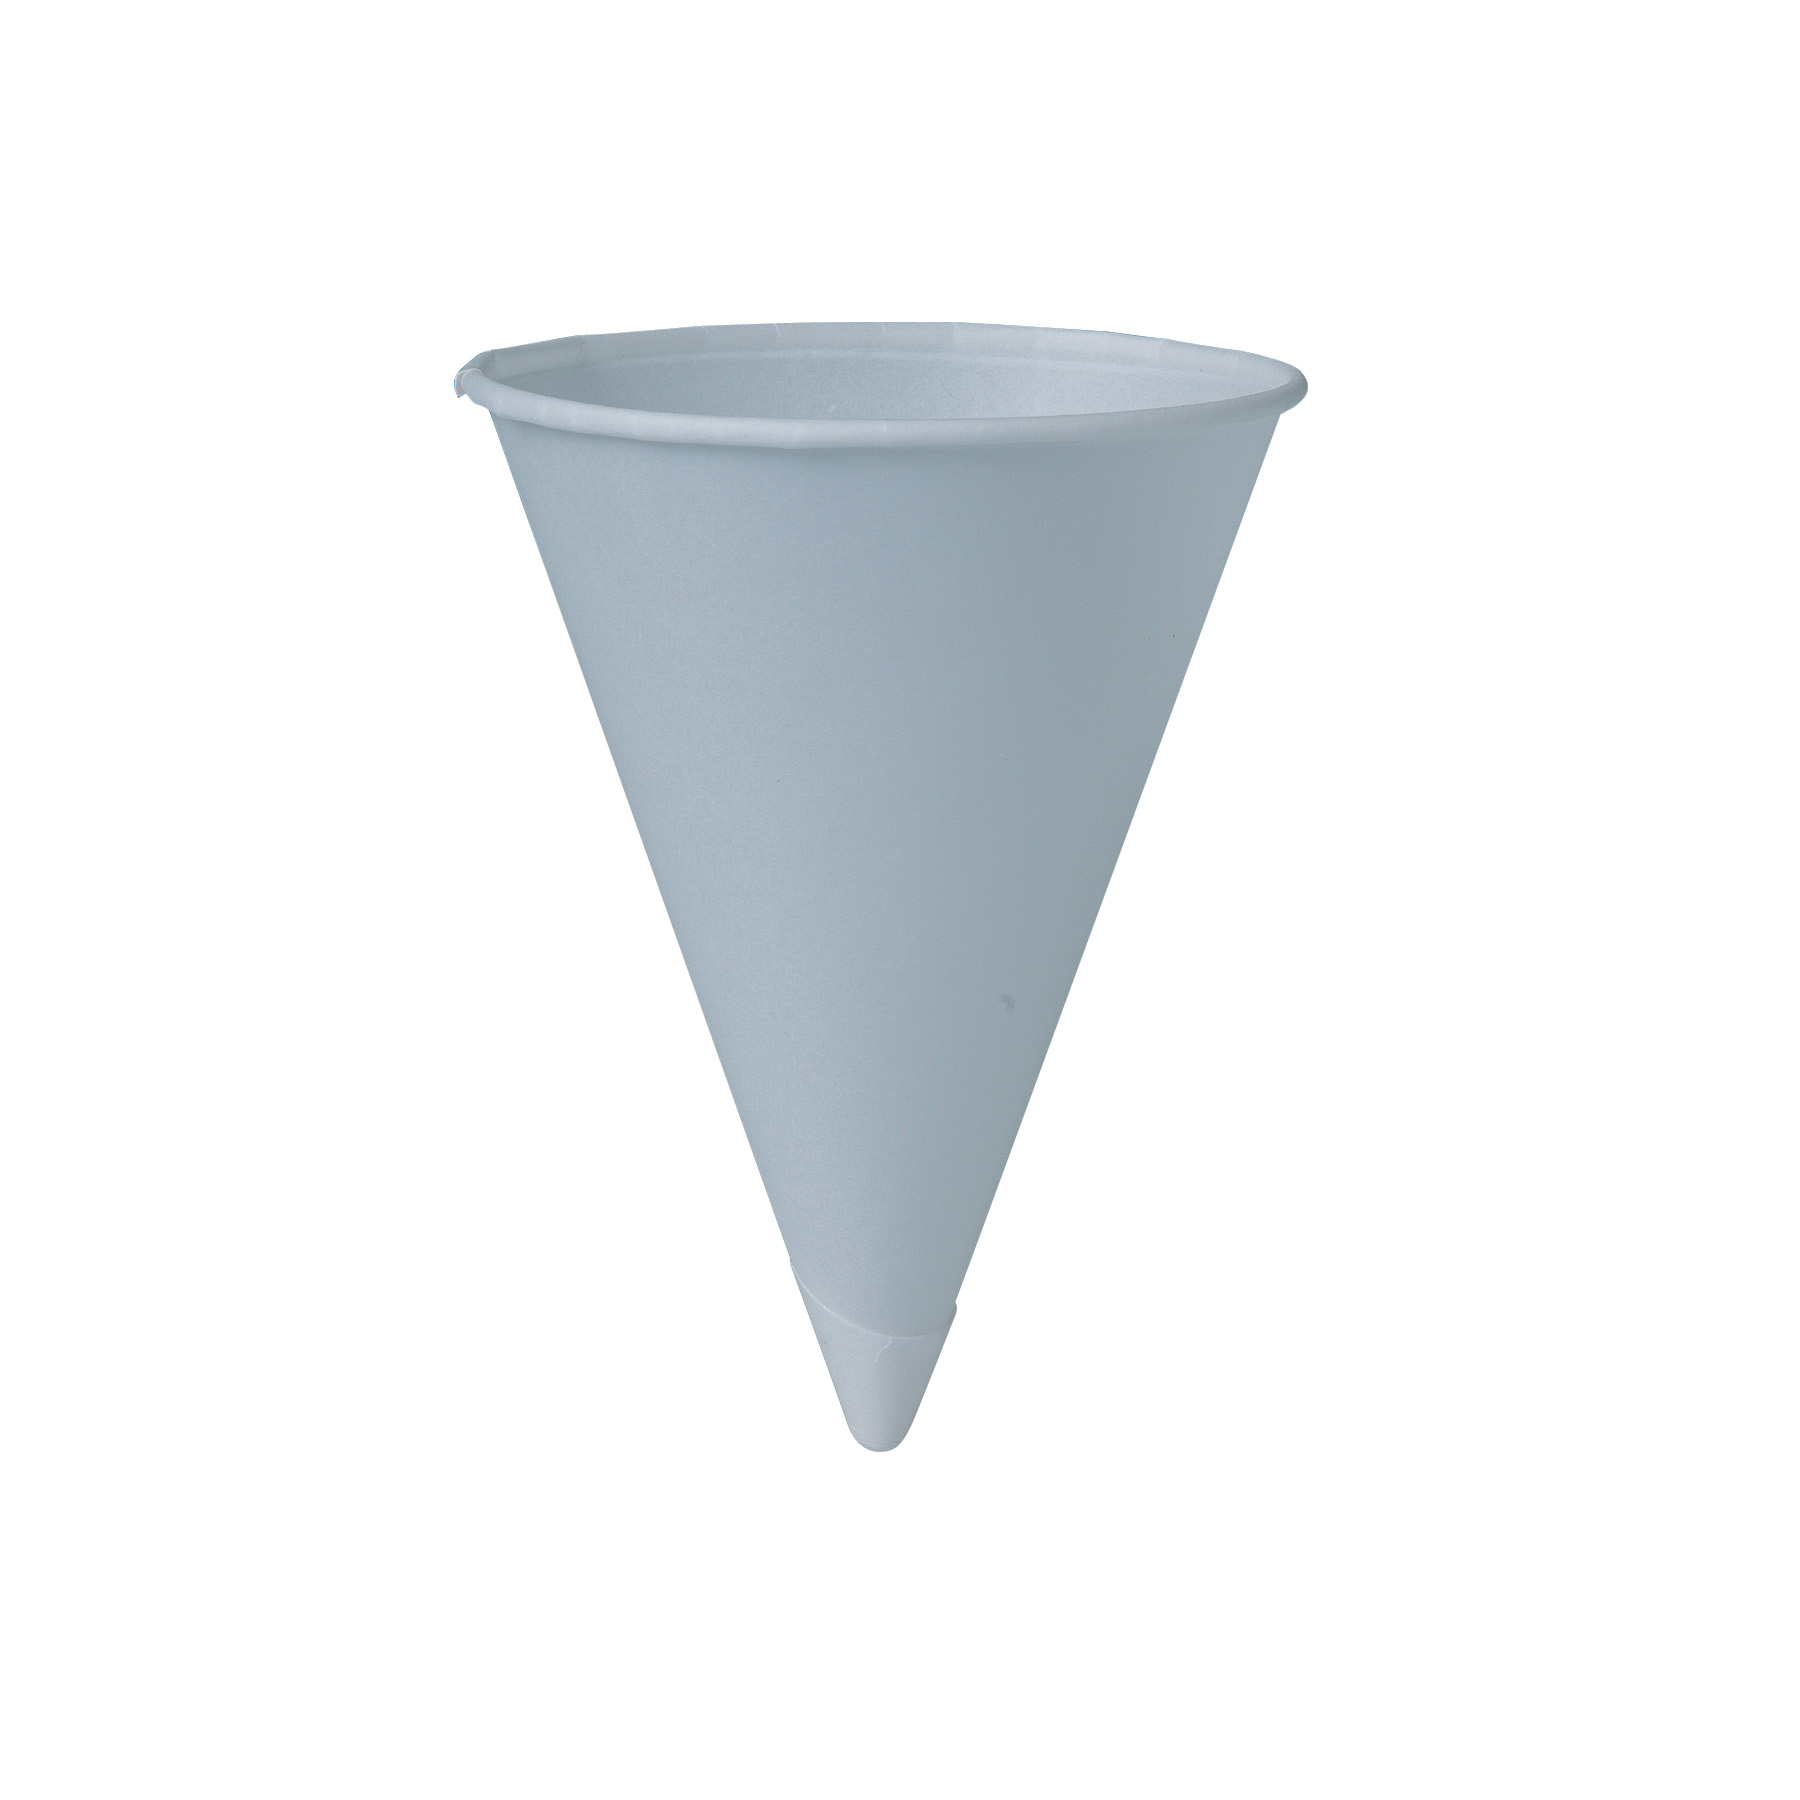 6OZ CONICAL CUP WITH RIM
25/200